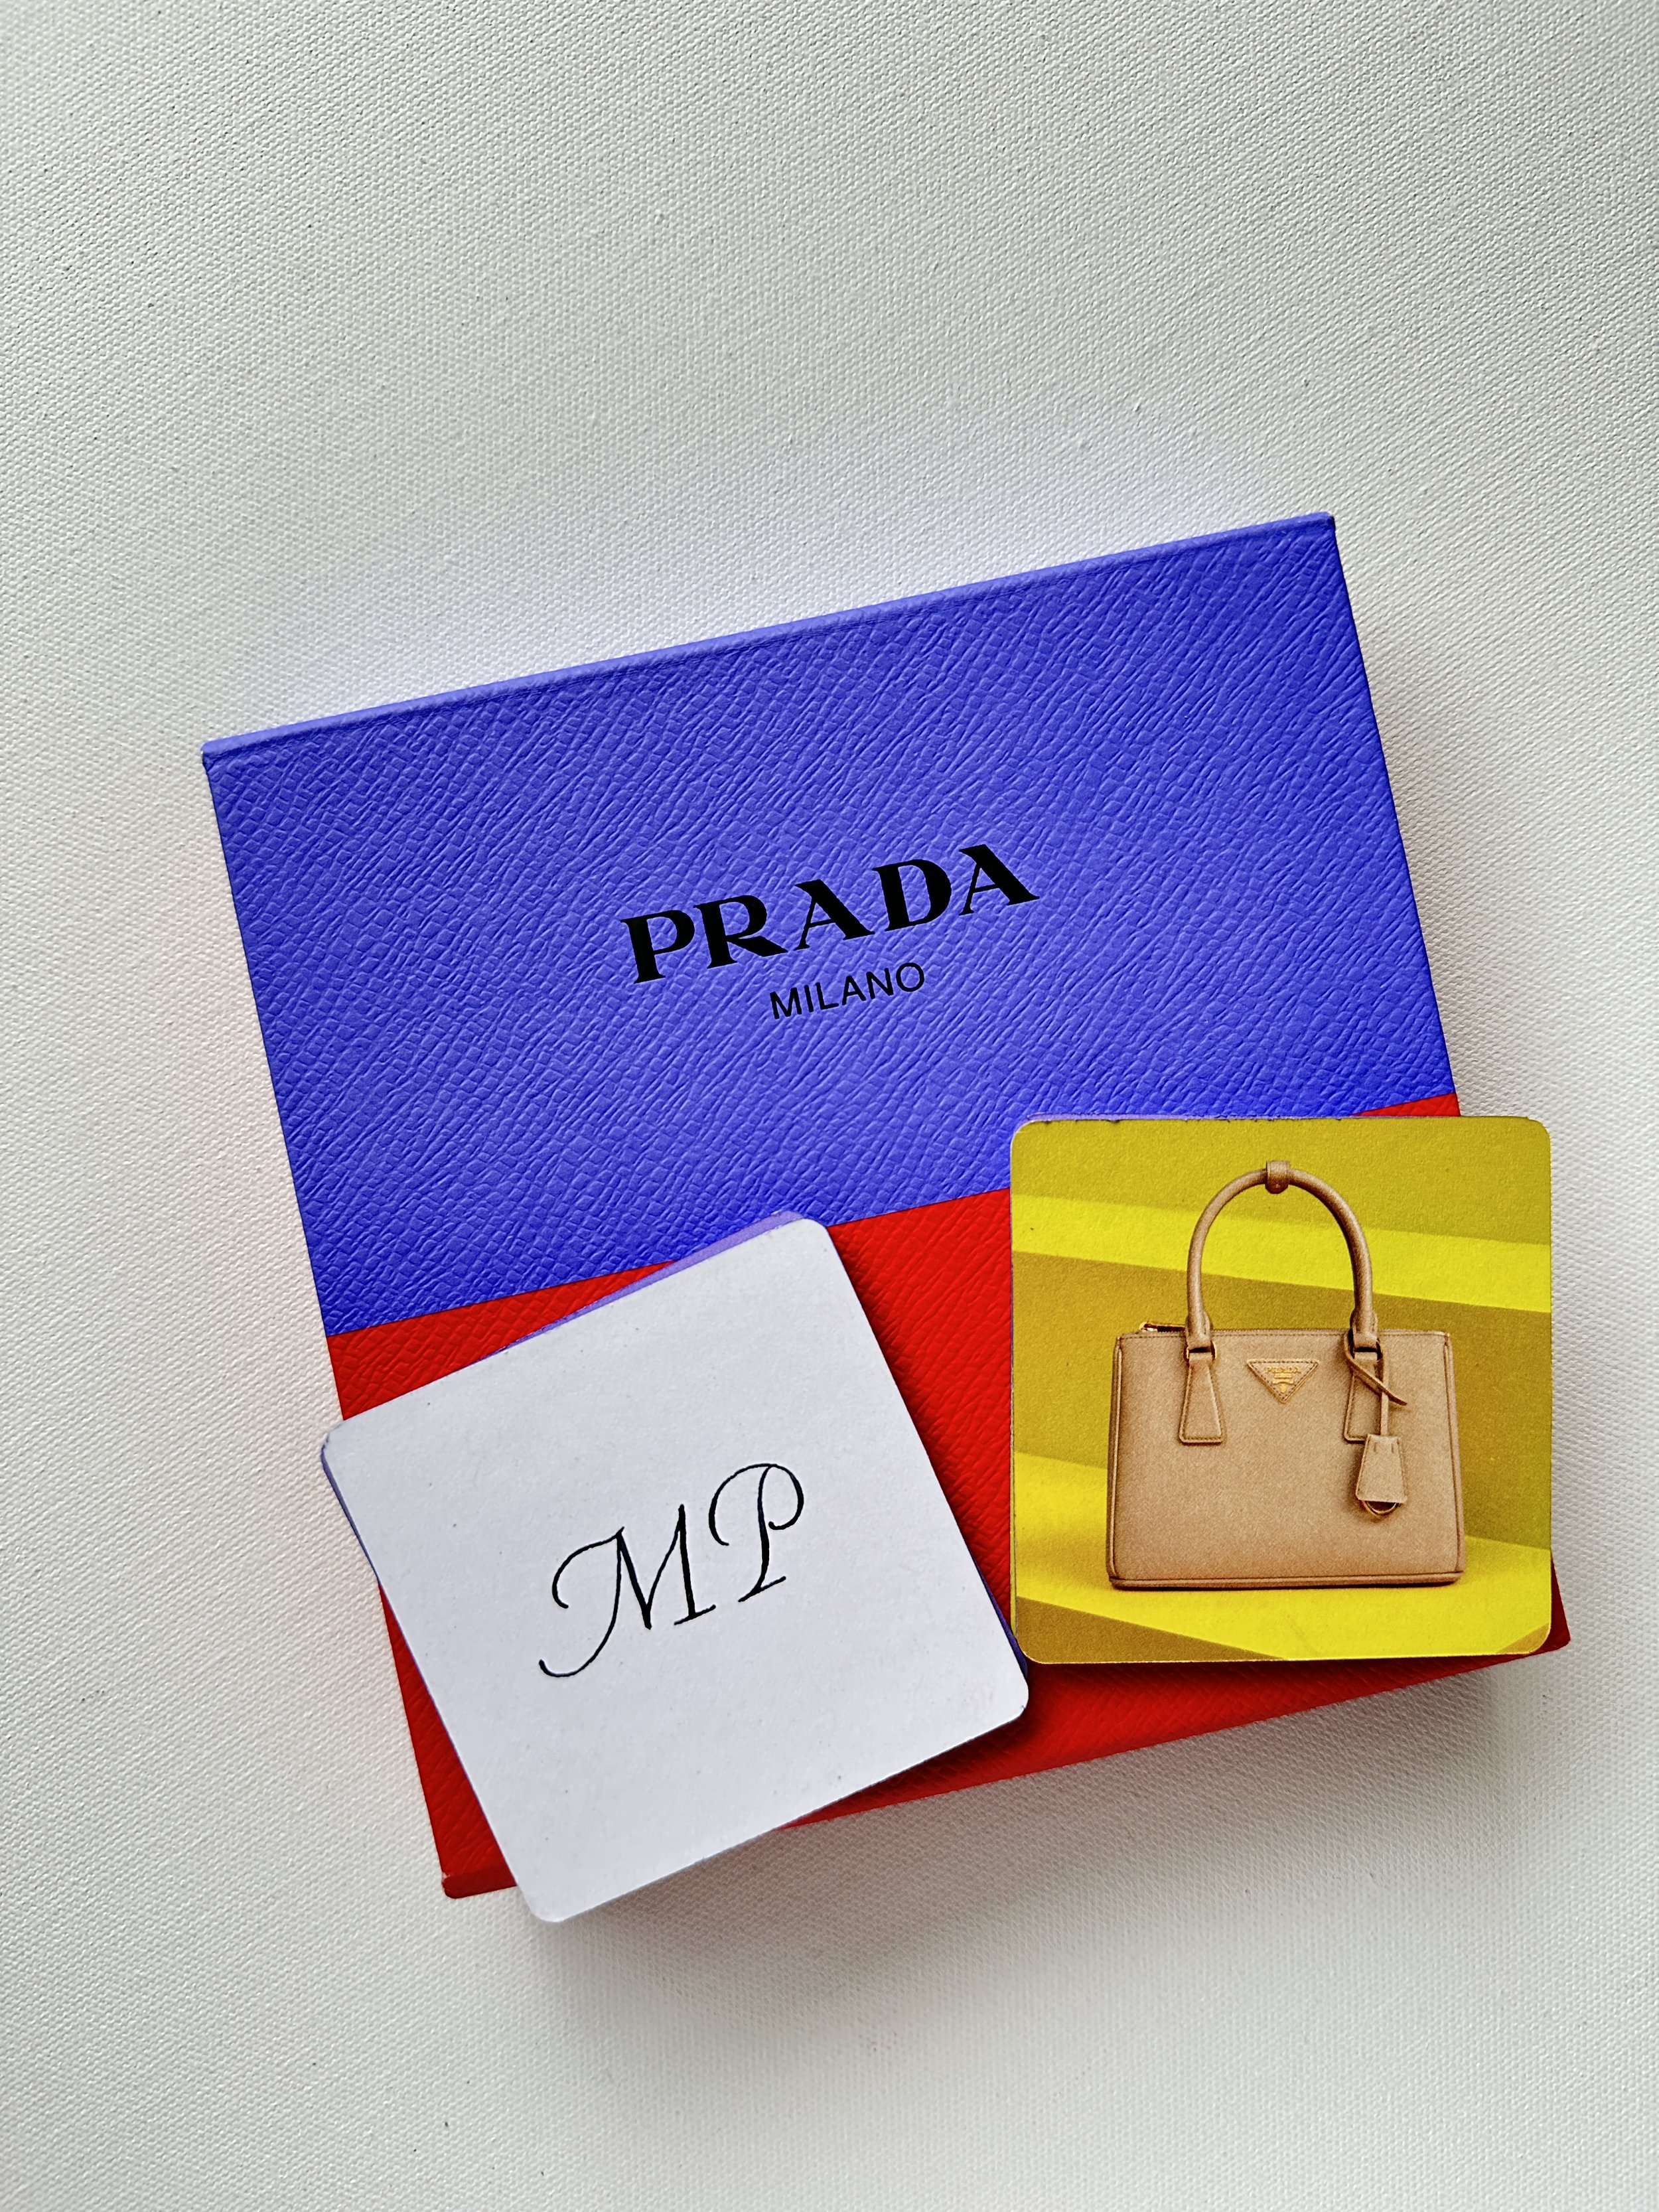 Personalized game cards - Prada (Beverly Hills)